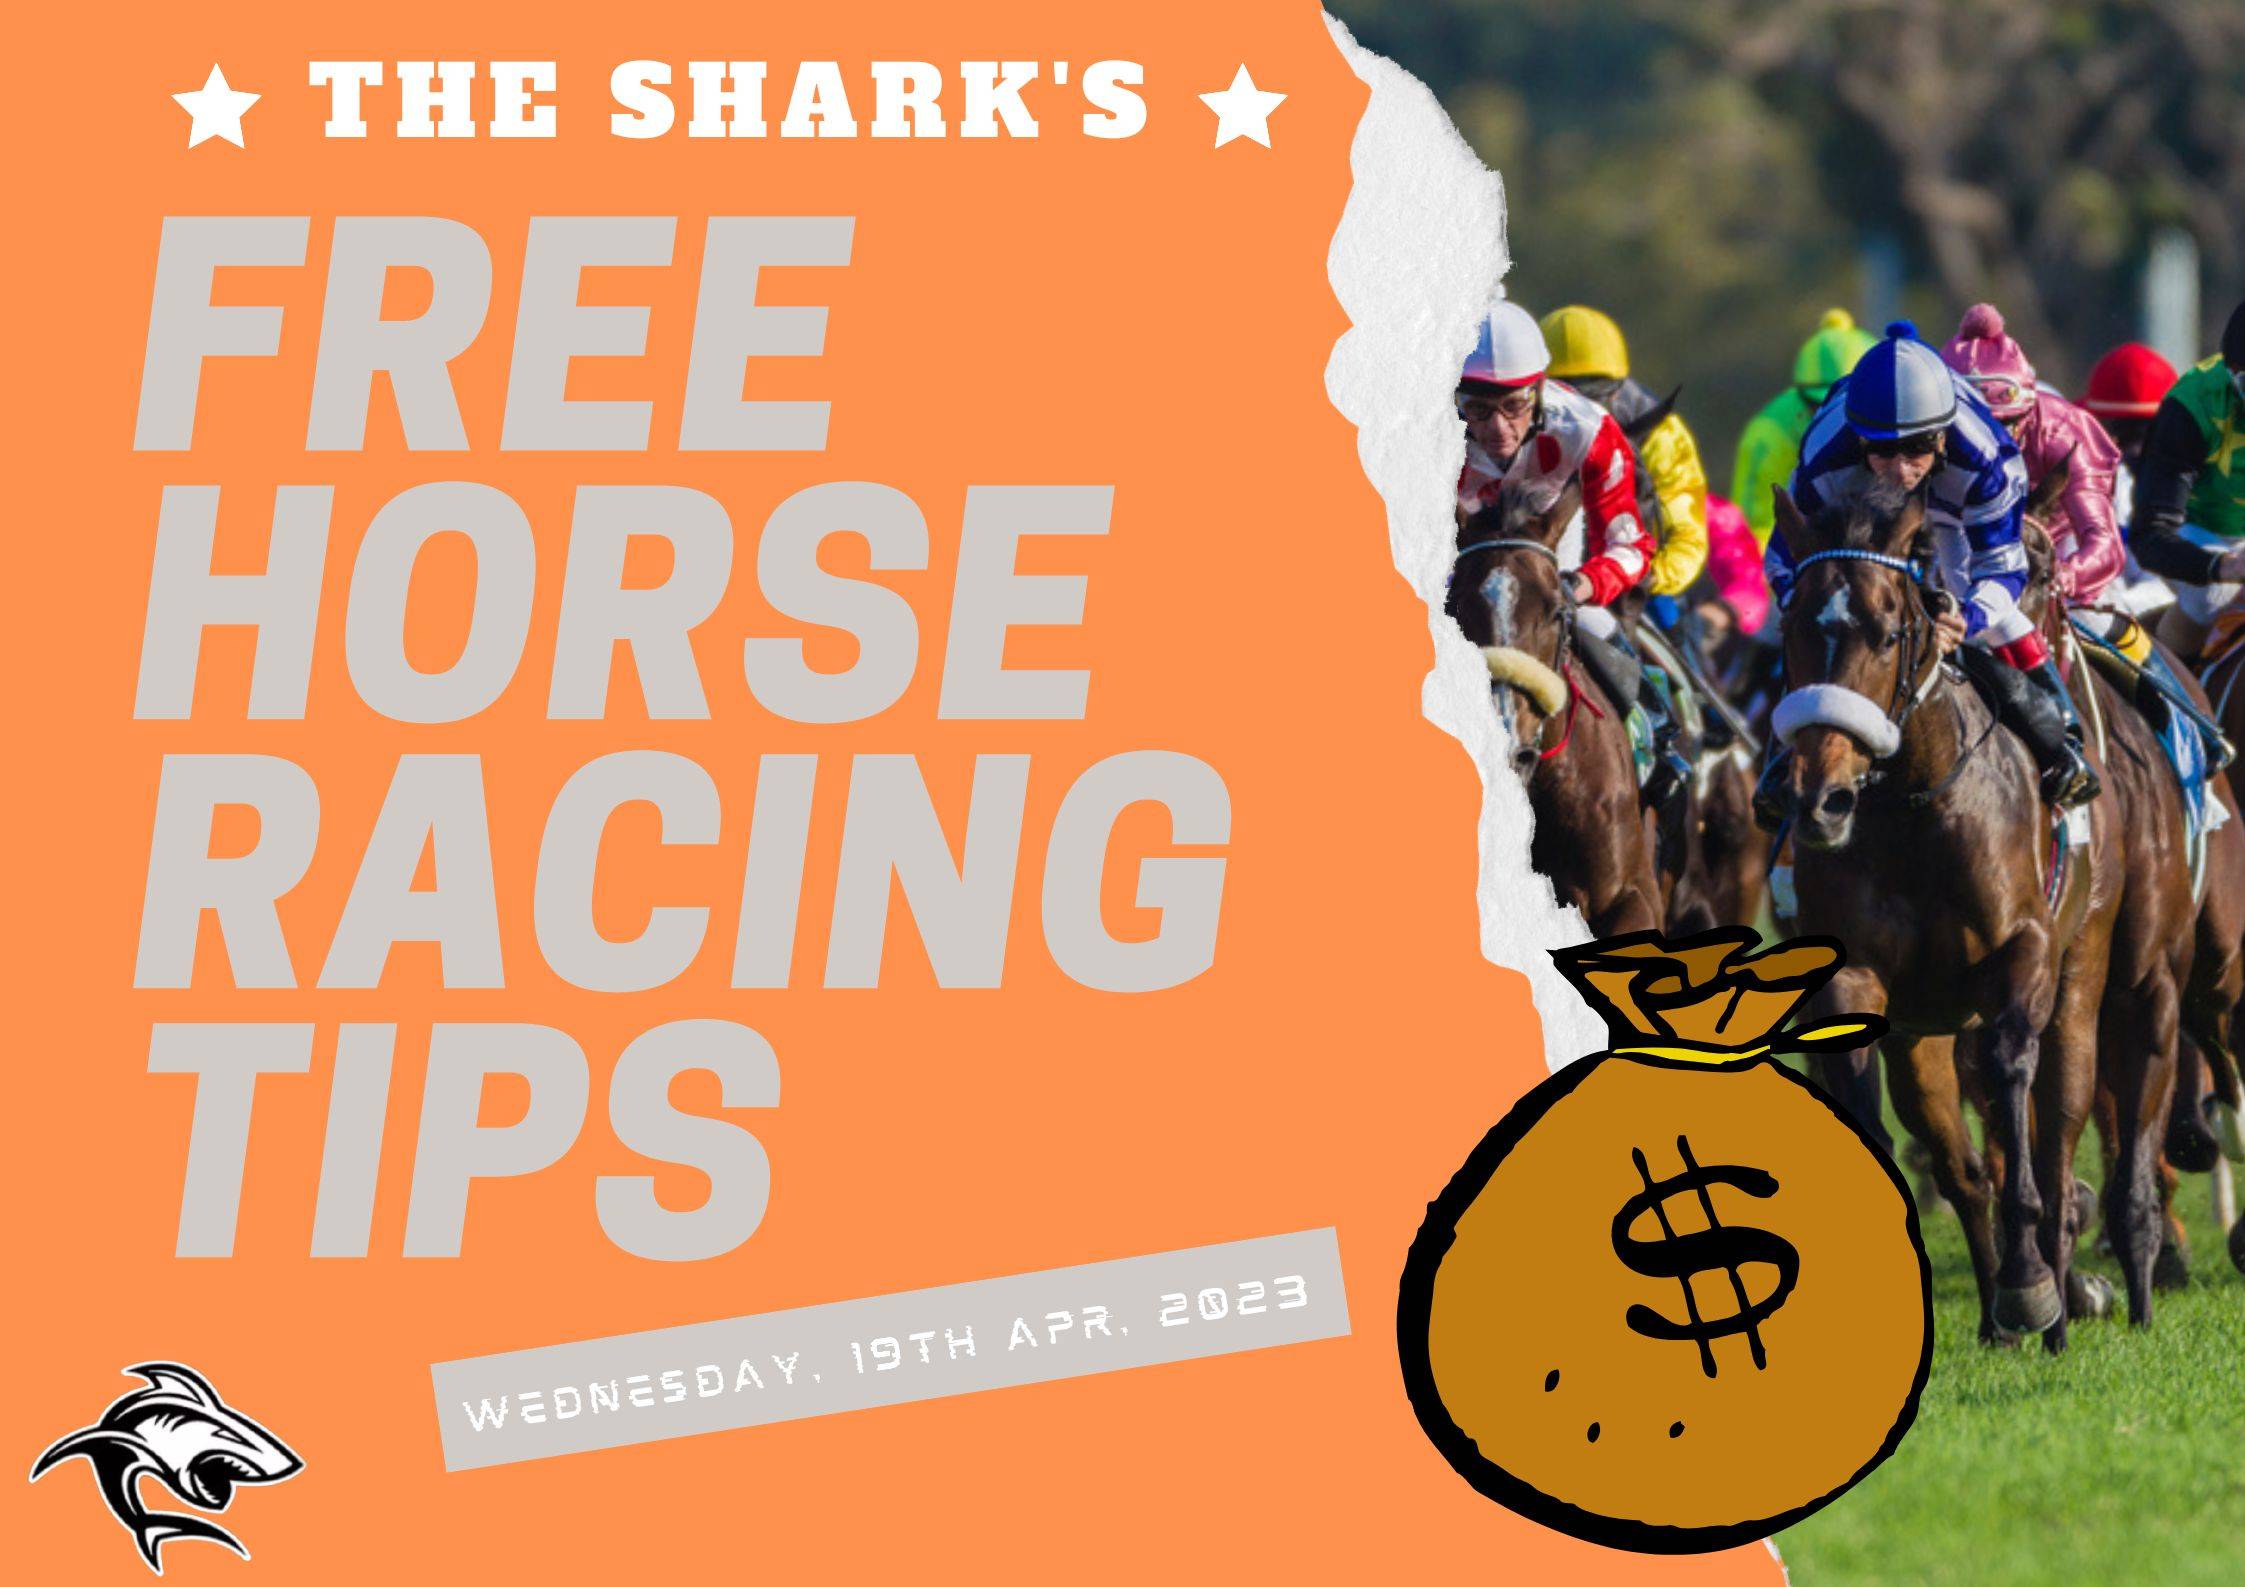 Free Horse Racing Tips - 19th Apr